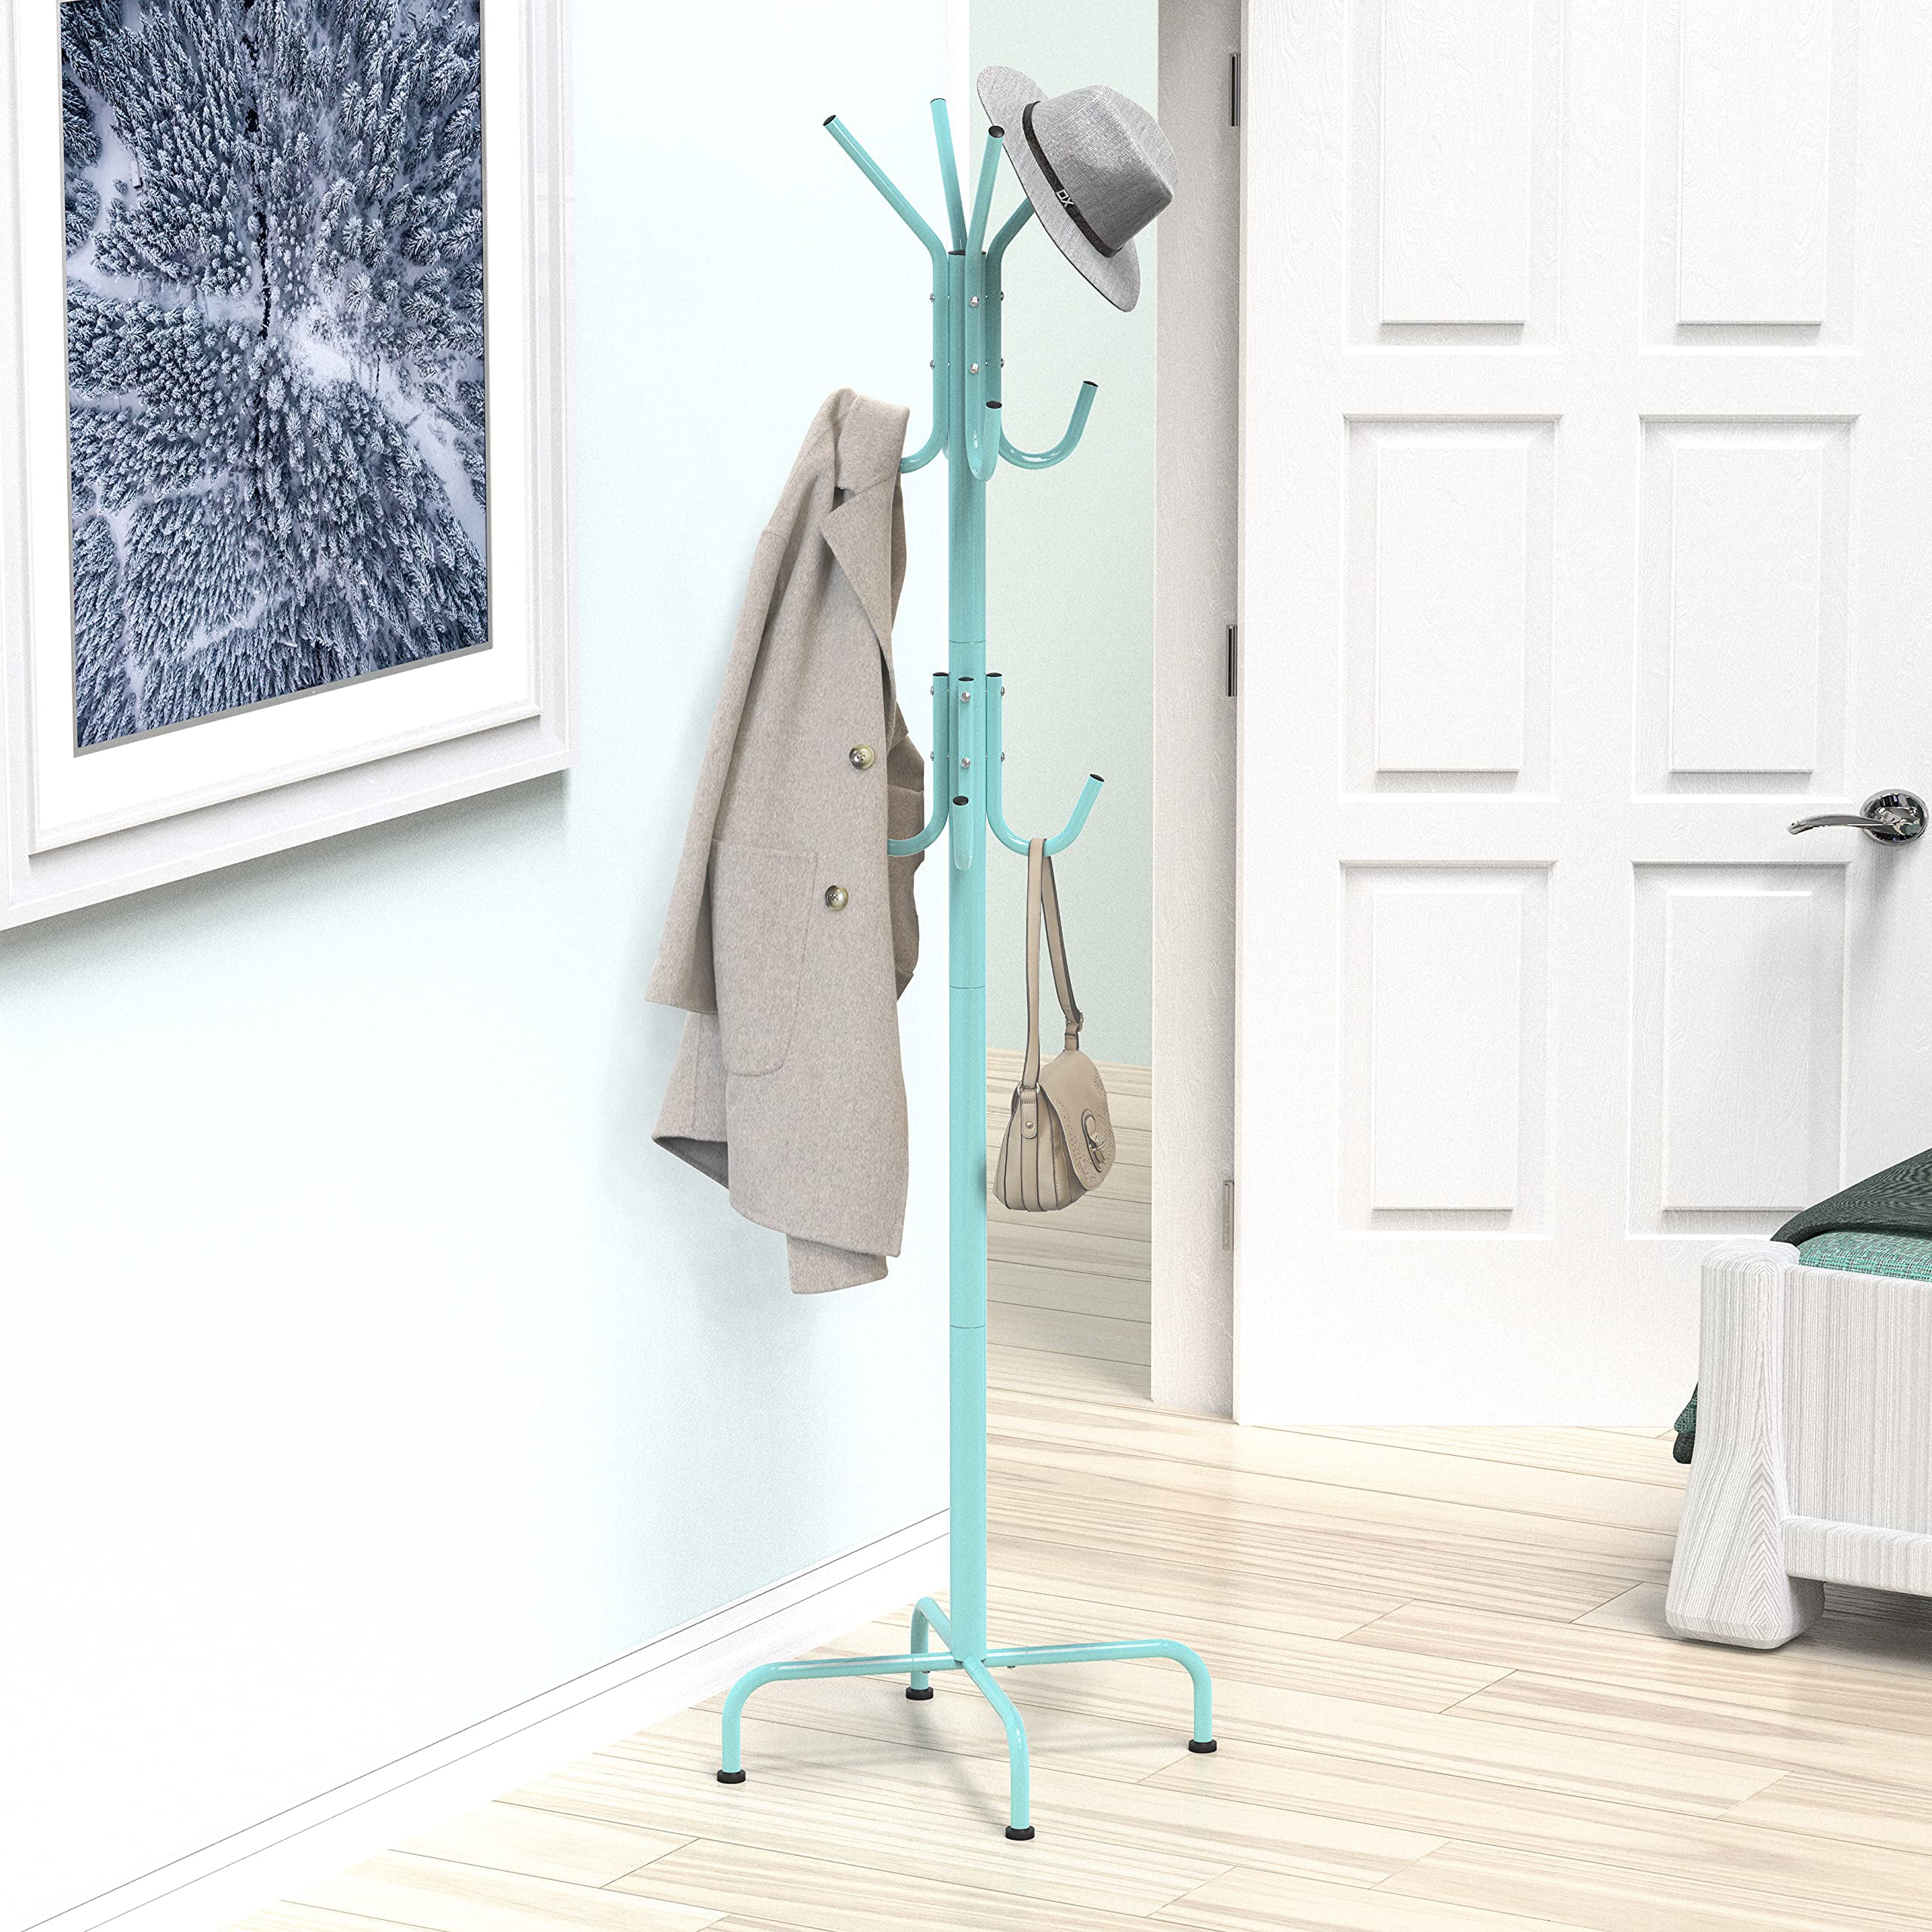 HORTA Coat Rack Entryway Organizer with Key Hooks For Hanging and